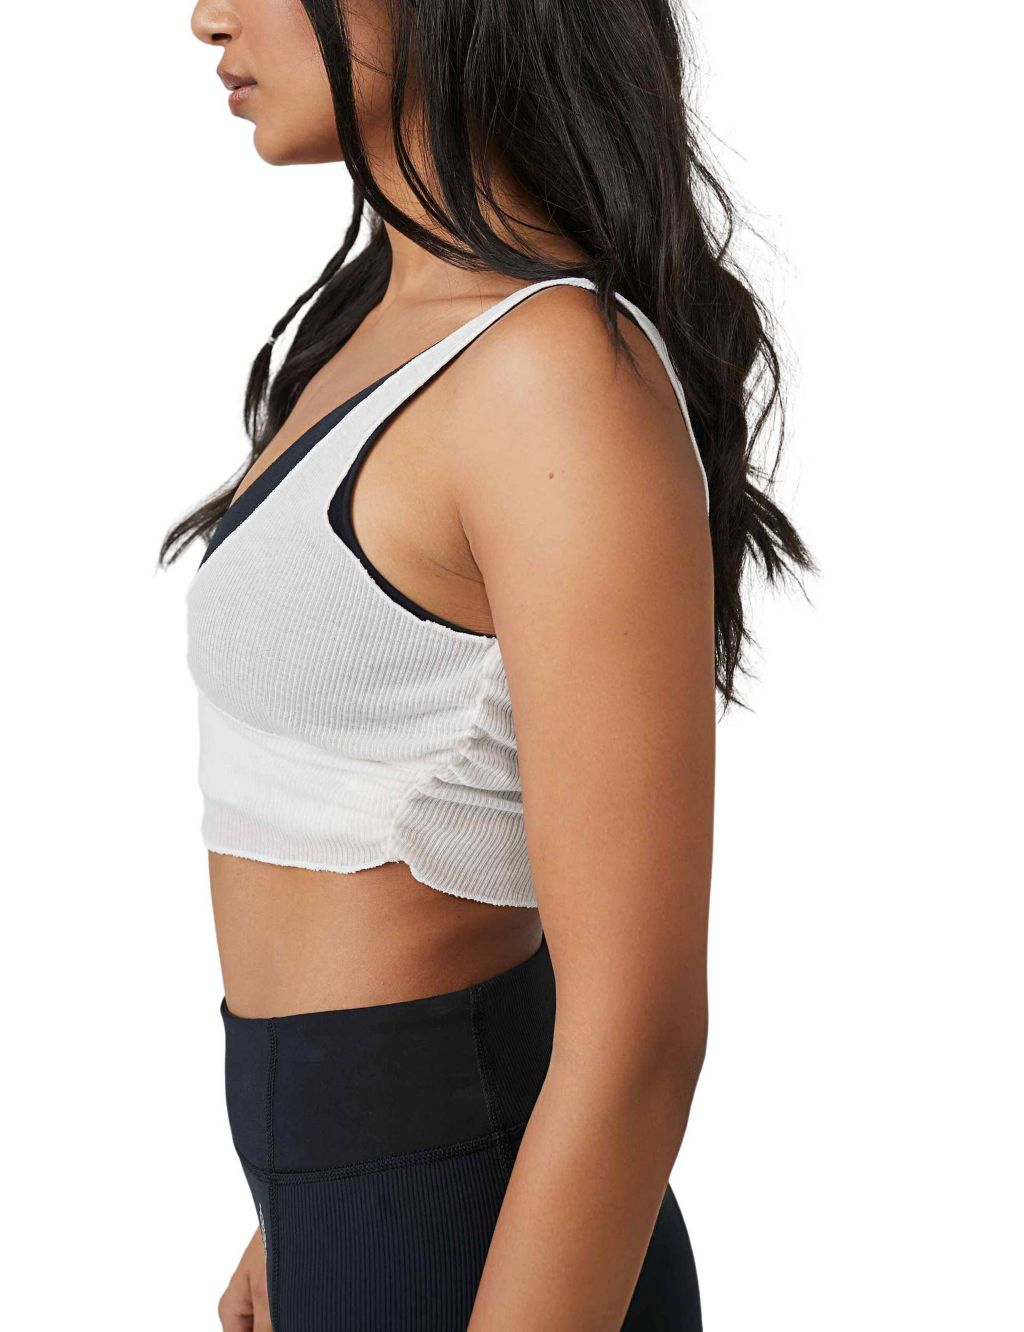 Reach For The Stars Sports Bra image 2